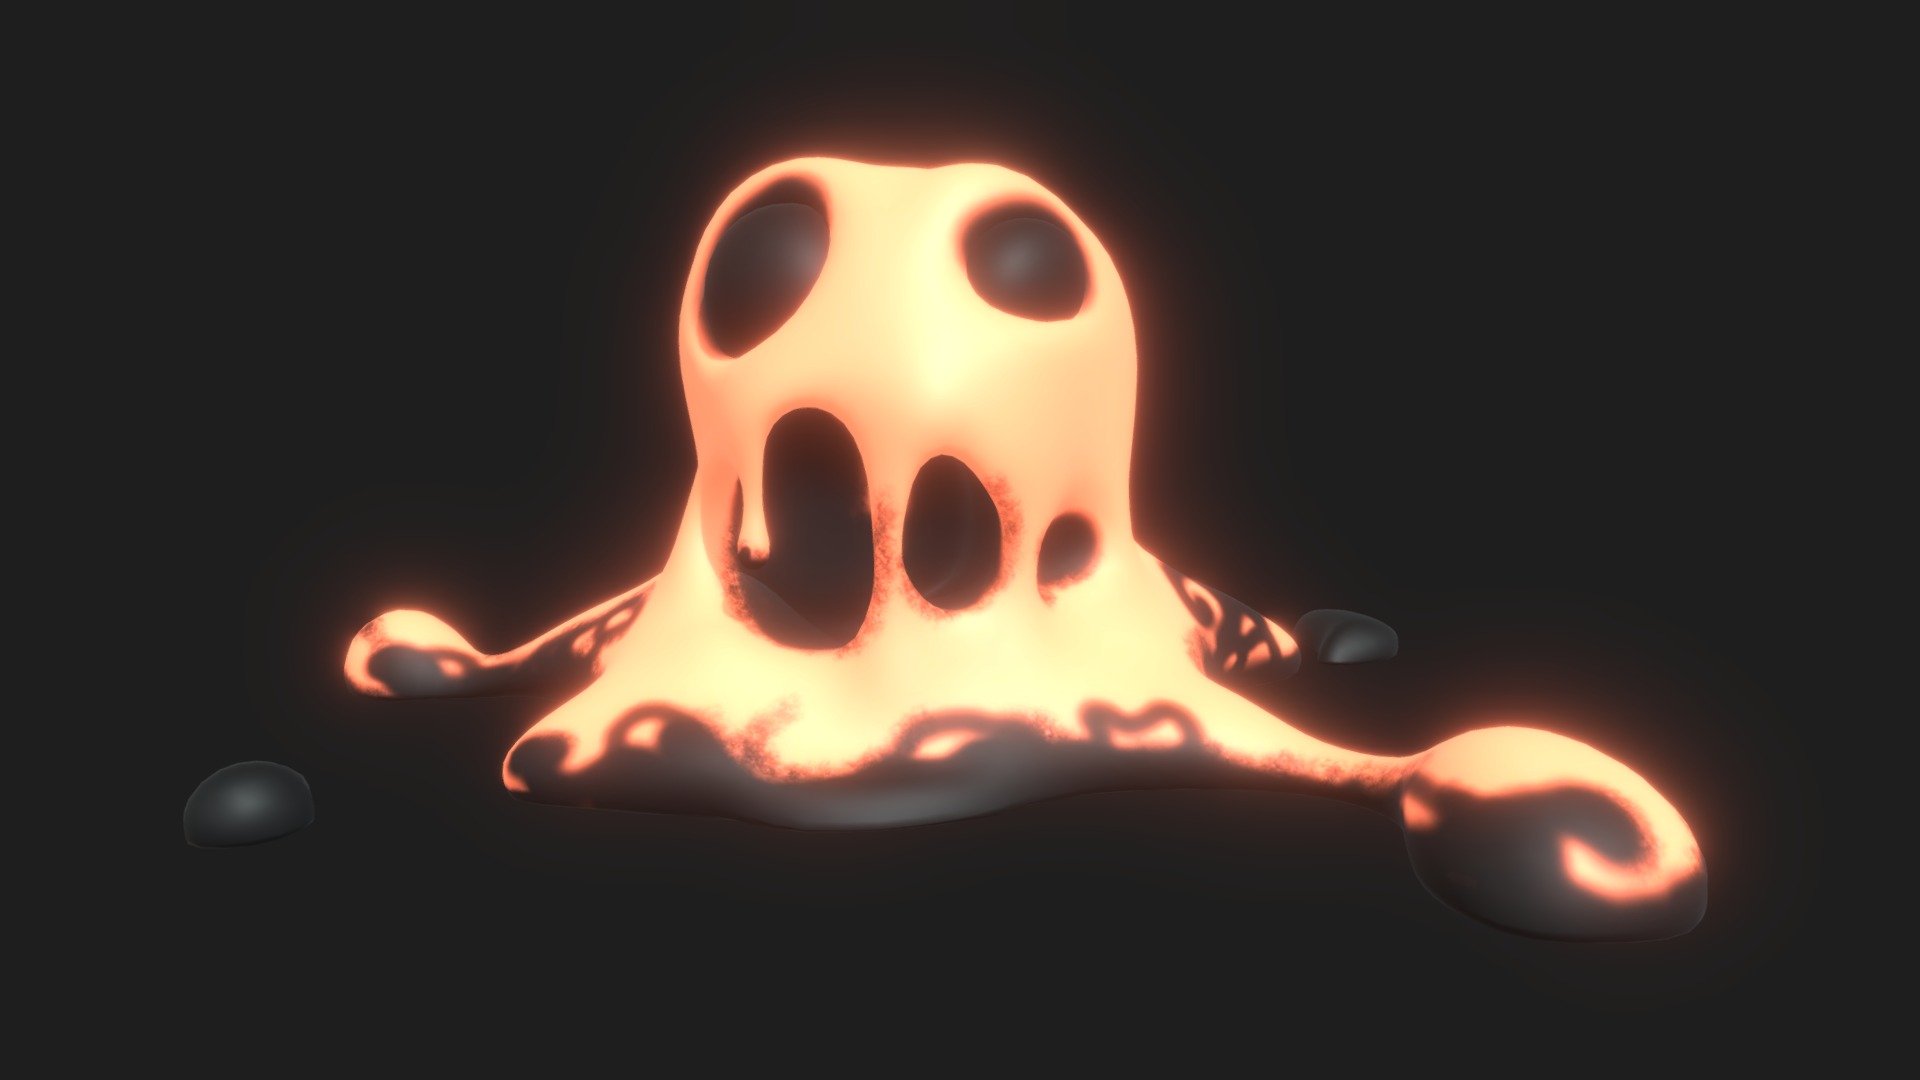 This little guy is a Level 1 Lava Drip. When he grows up he wants to become a boss monster&hellip;

Check out my Youtube channel for 3d tutorials, reviews and more:
https://www.youtube.com/c/AlexanderHowell - Lava Drip - Download Free 3D model by owlhowell 3d model